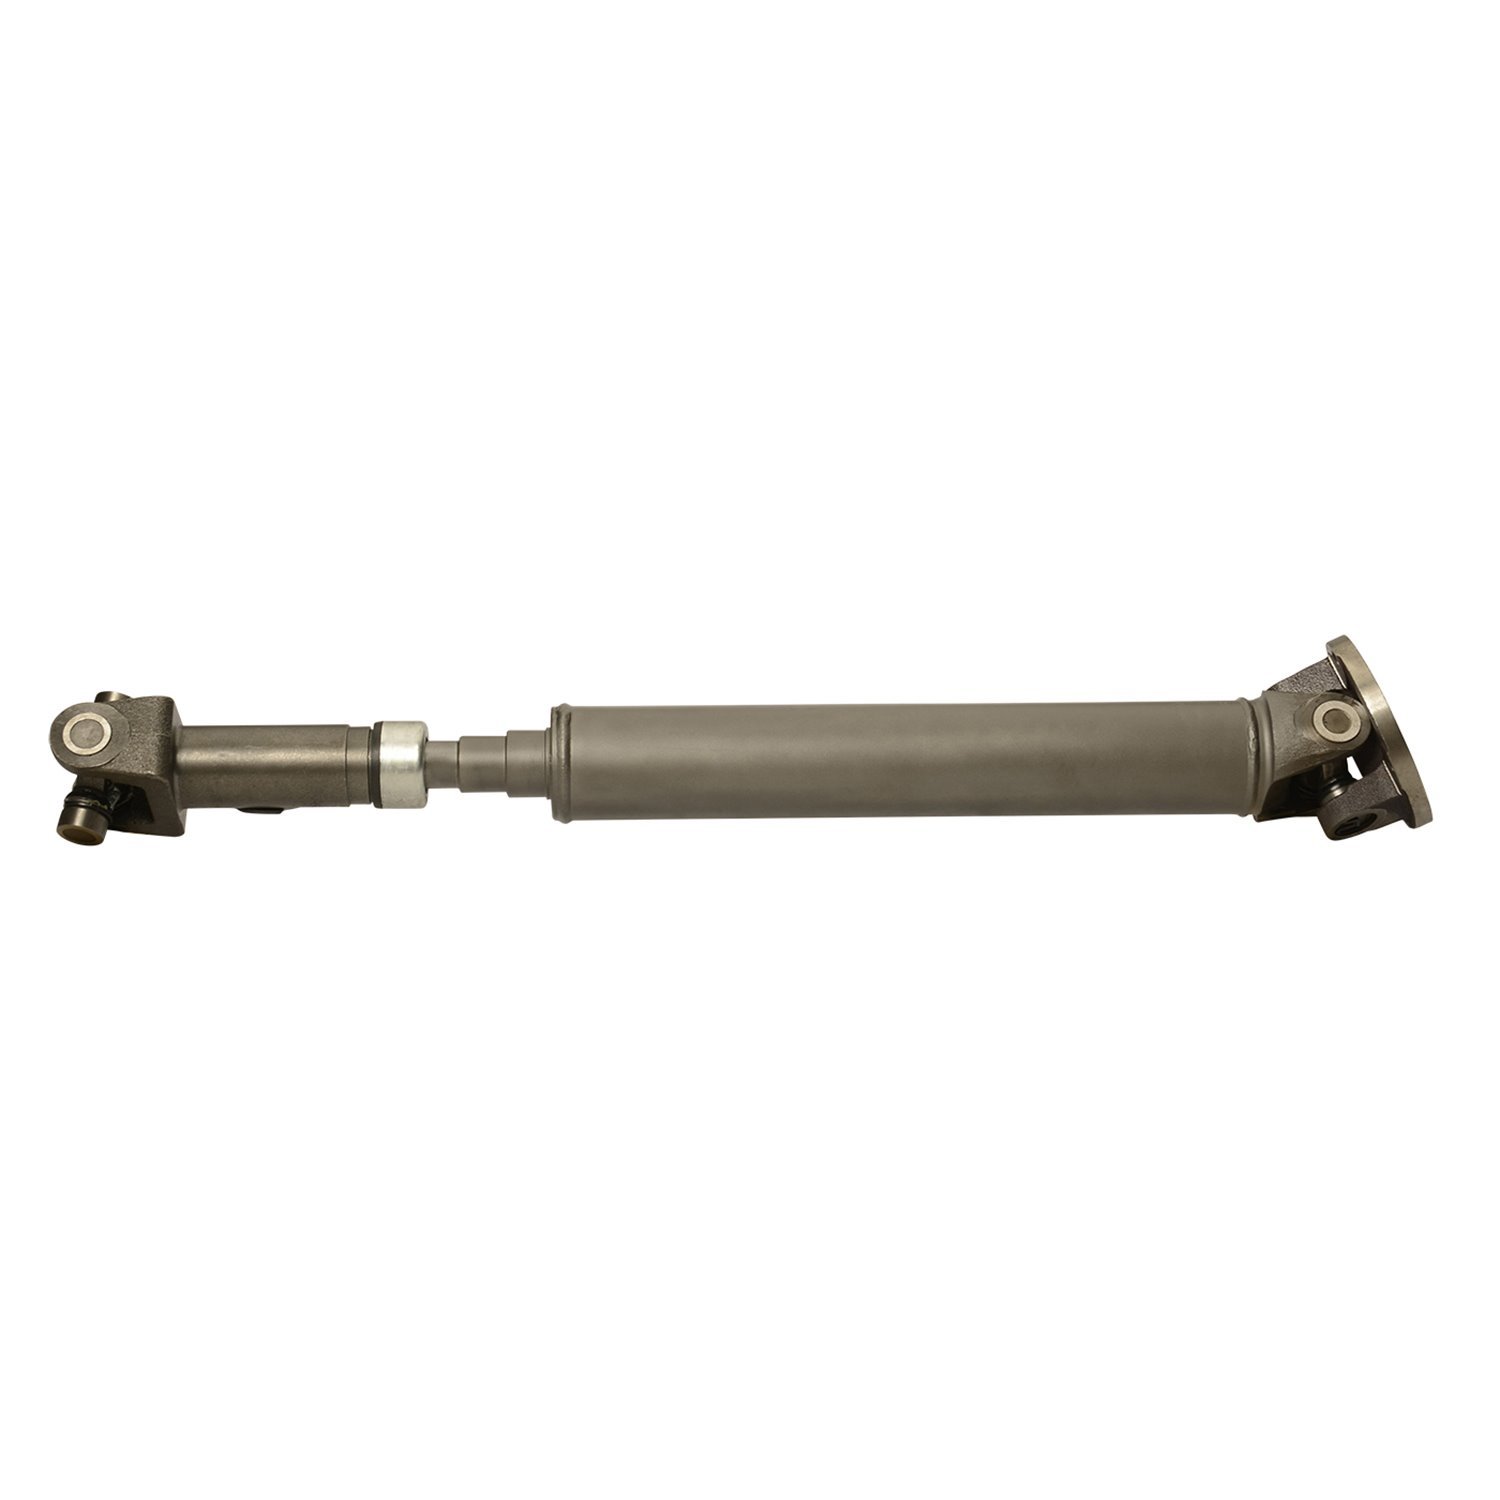 USA Standard ZDS9347 Front Driveshaft, For GM K3500 Pickup, 26-1/2 in. Center-To-Center